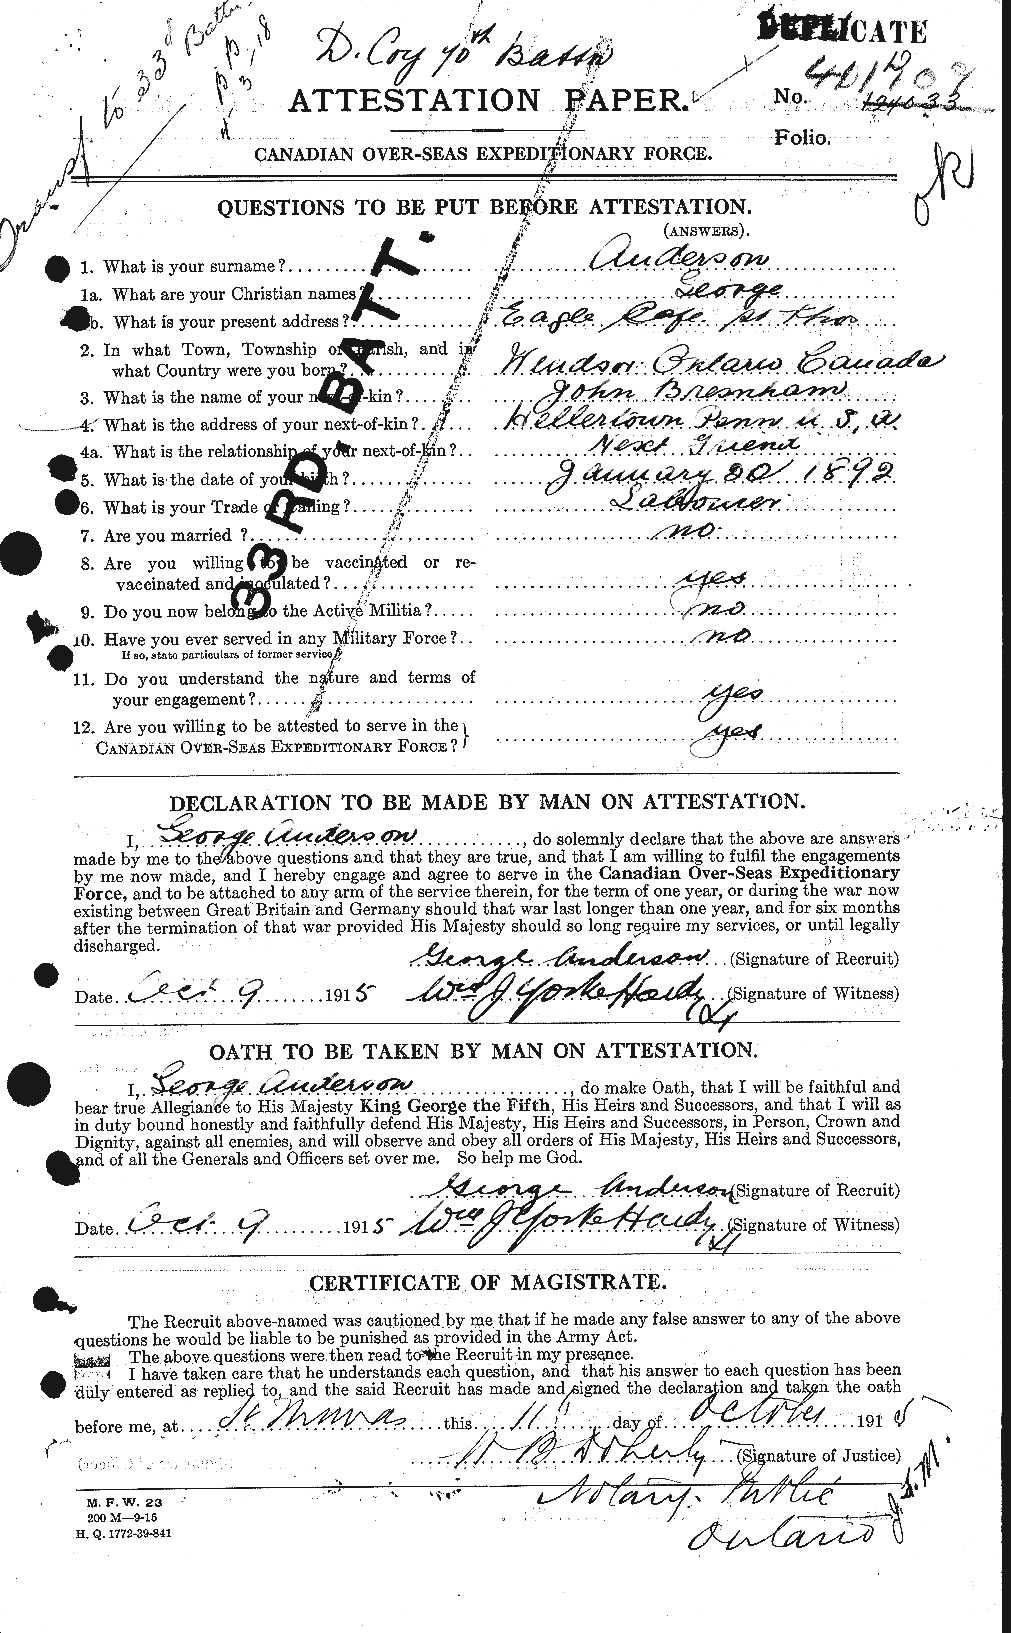 Personnel Records of the First World War - CEF 209777a